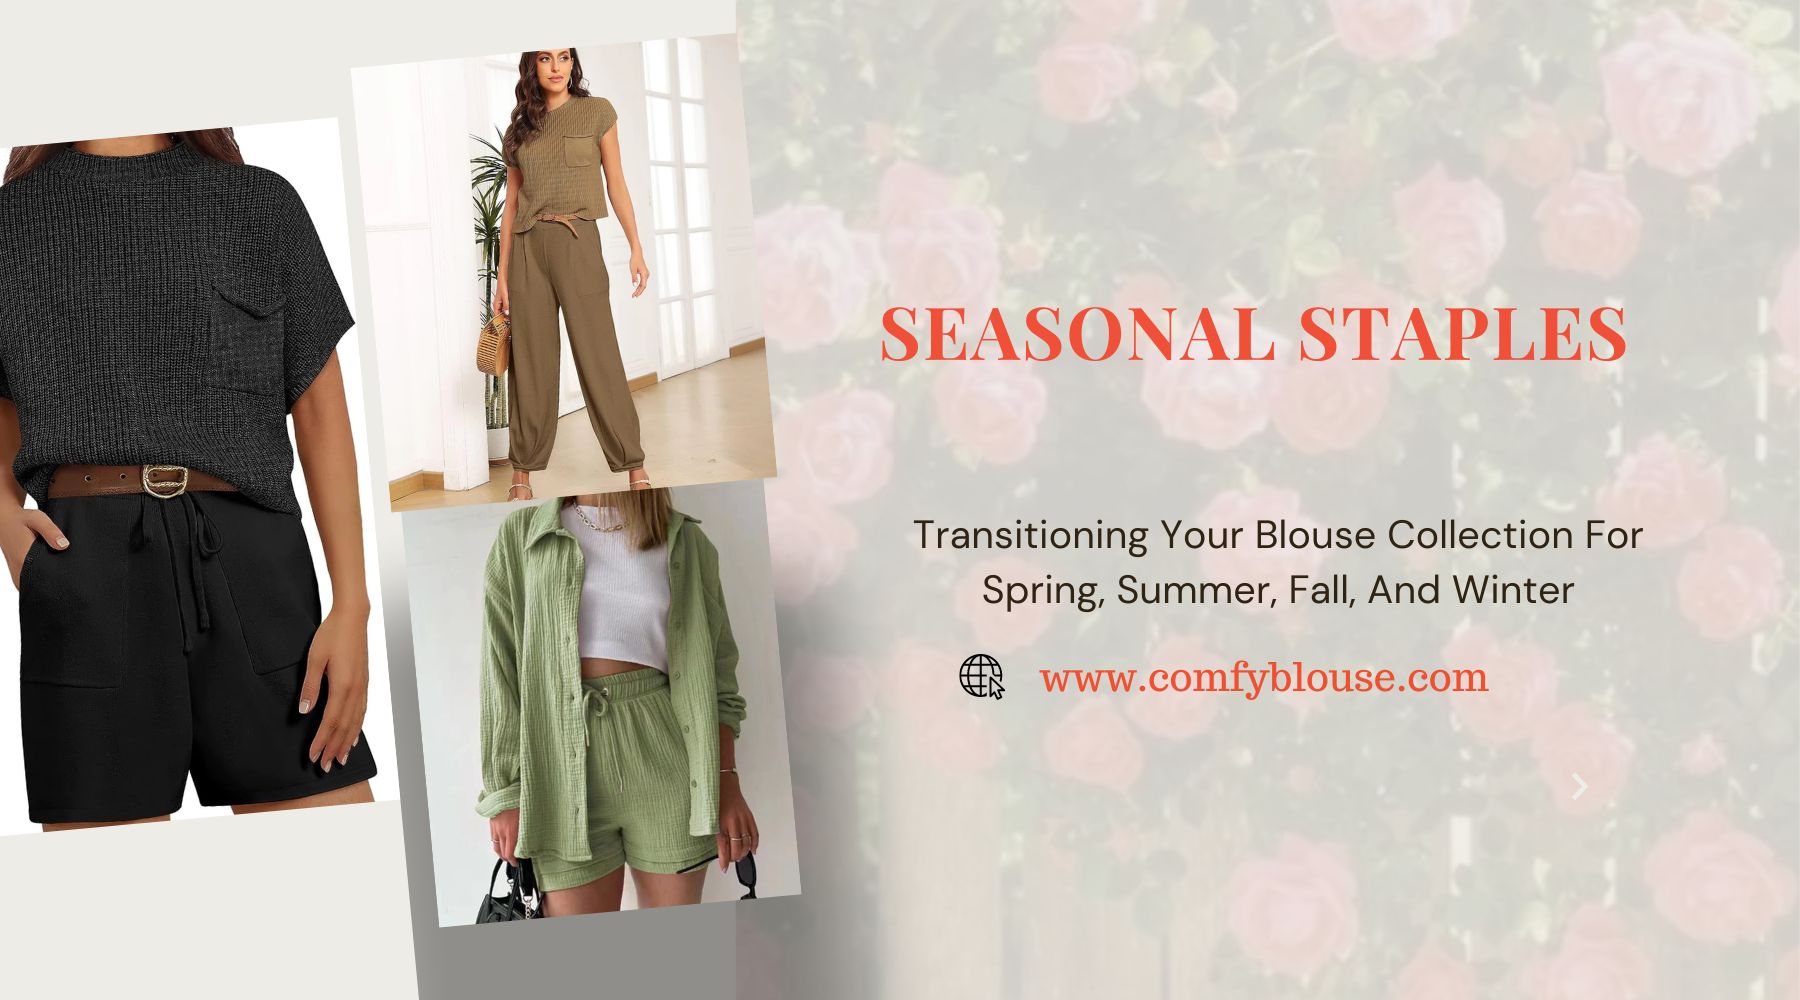 Seasonal Staples: Transitioning Your Blouse Collection For Spring, Summer, Fall, And Winter